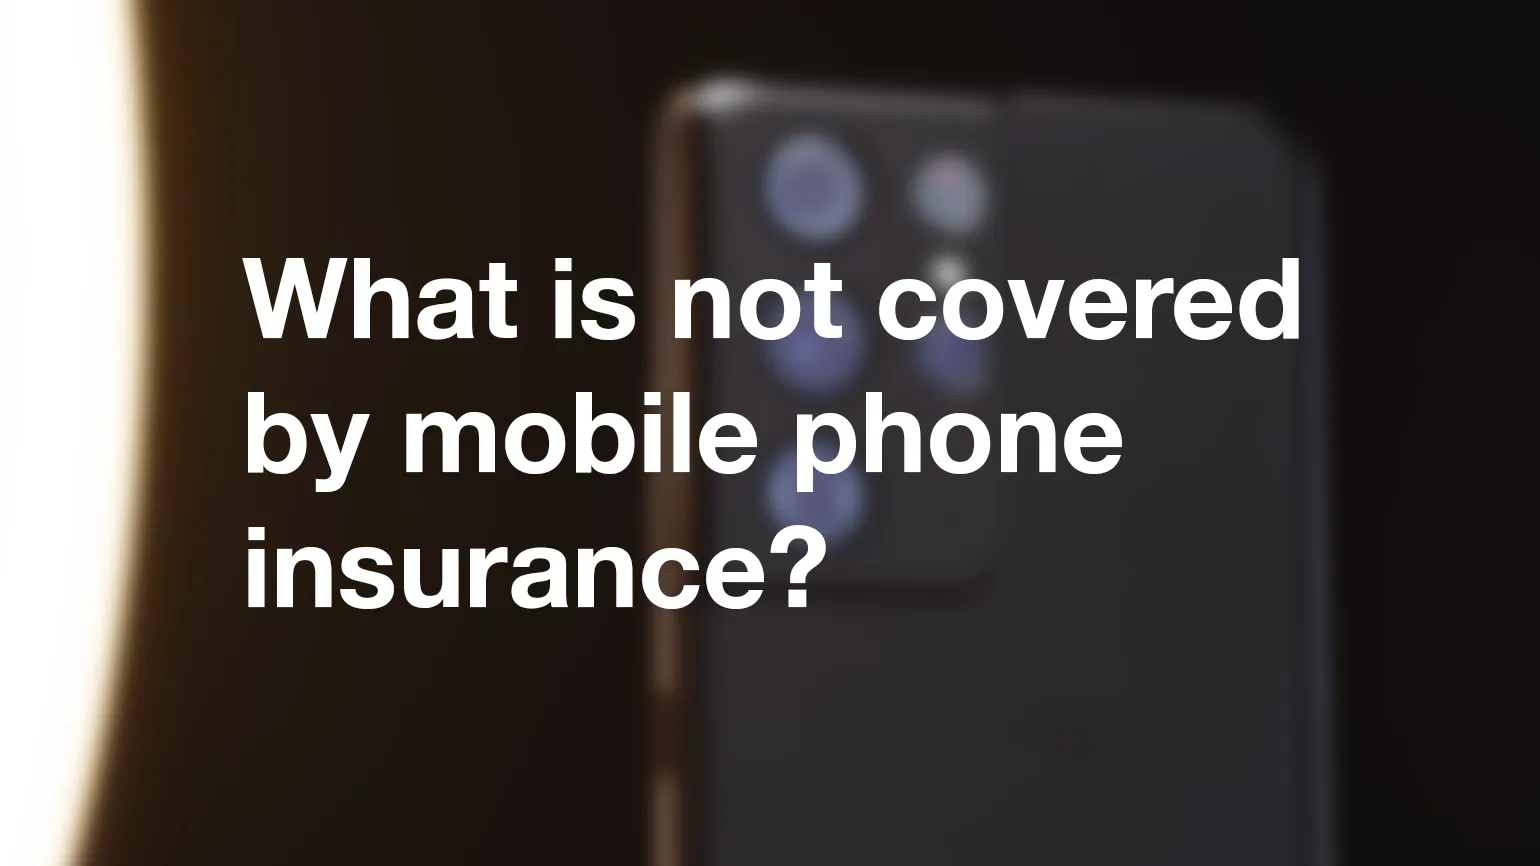 What is not covered by mobile phone insurance?